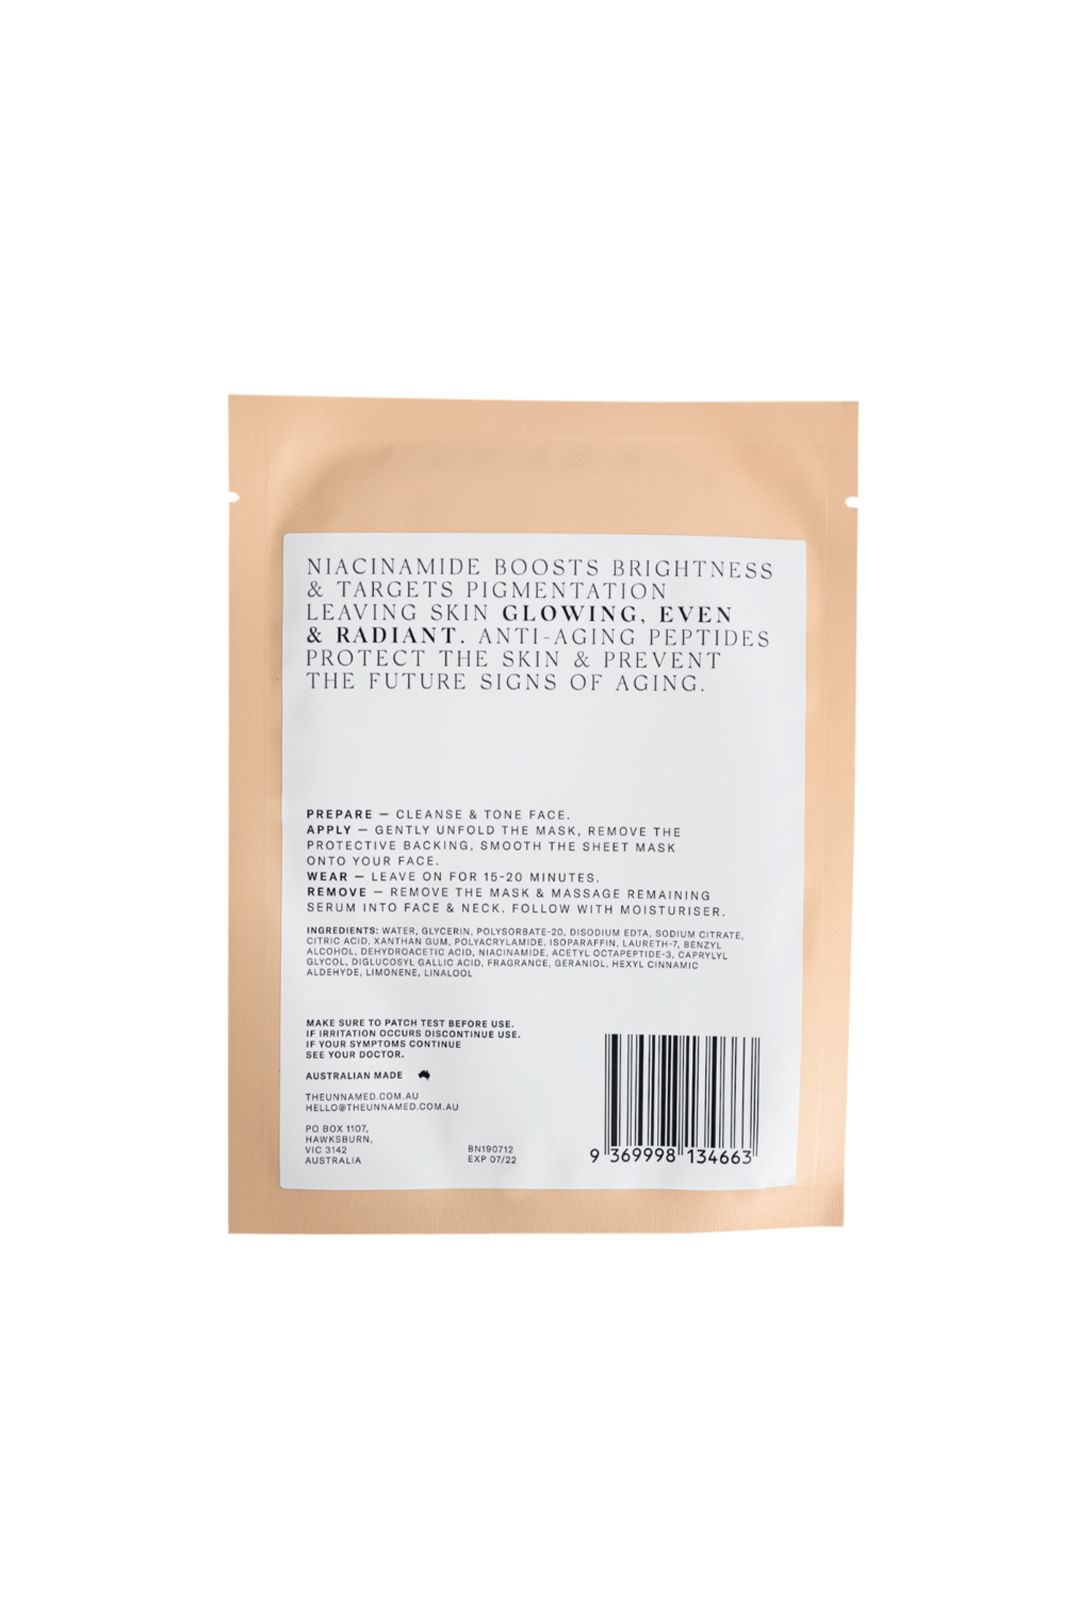 theunnamed-brightening-anti-aging-sheet-mask-Back